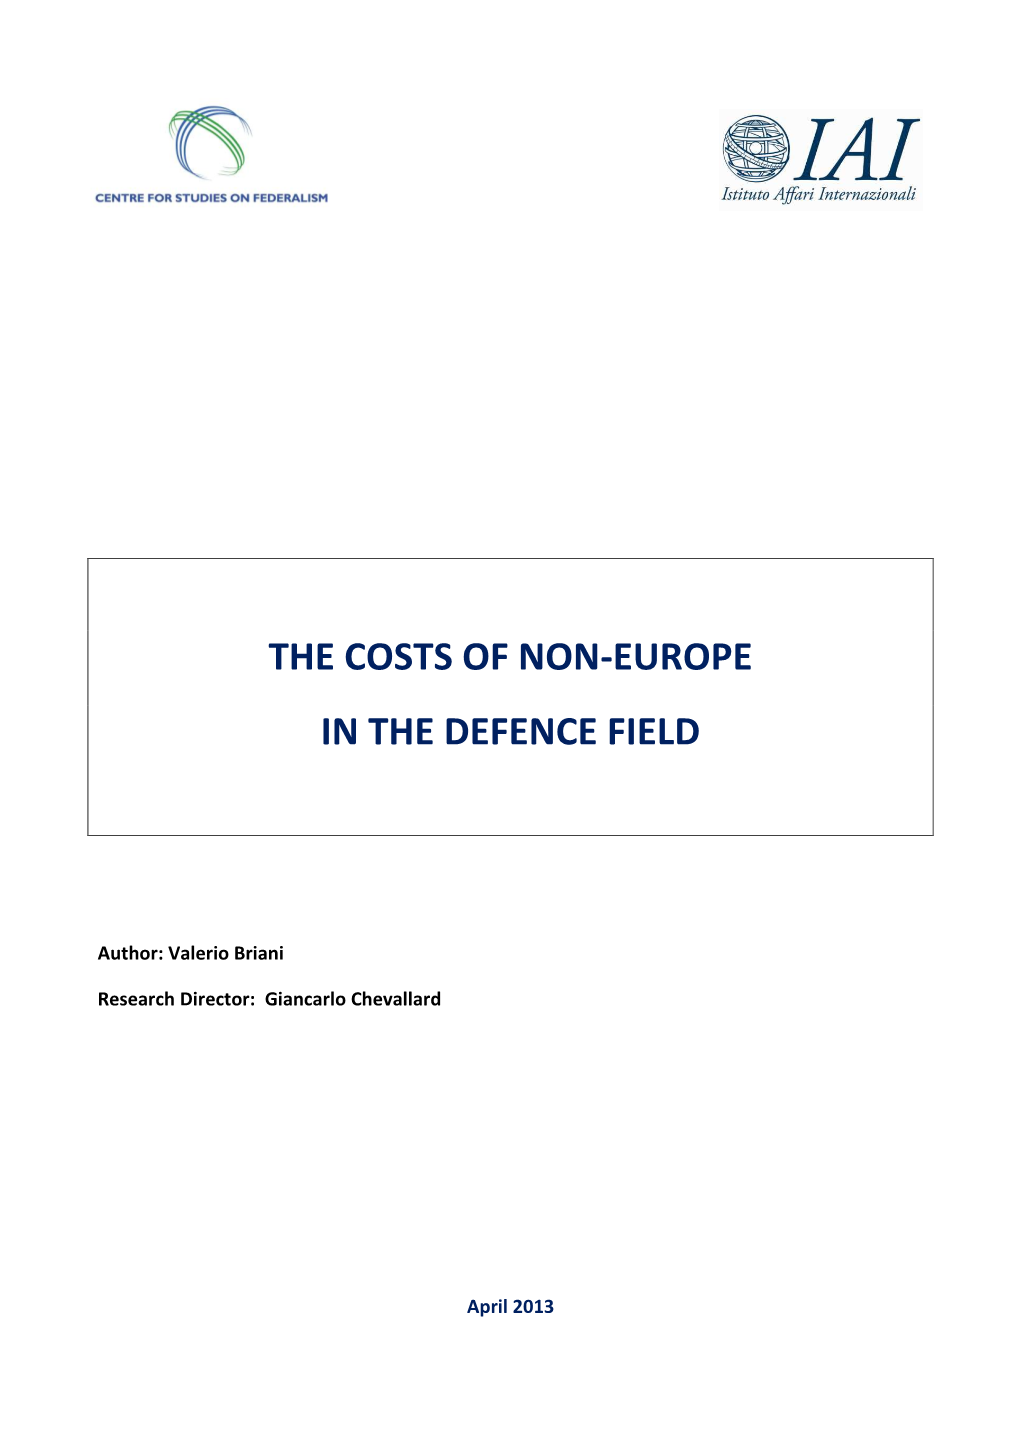 The Costs of Non-Europe in the Defence Field